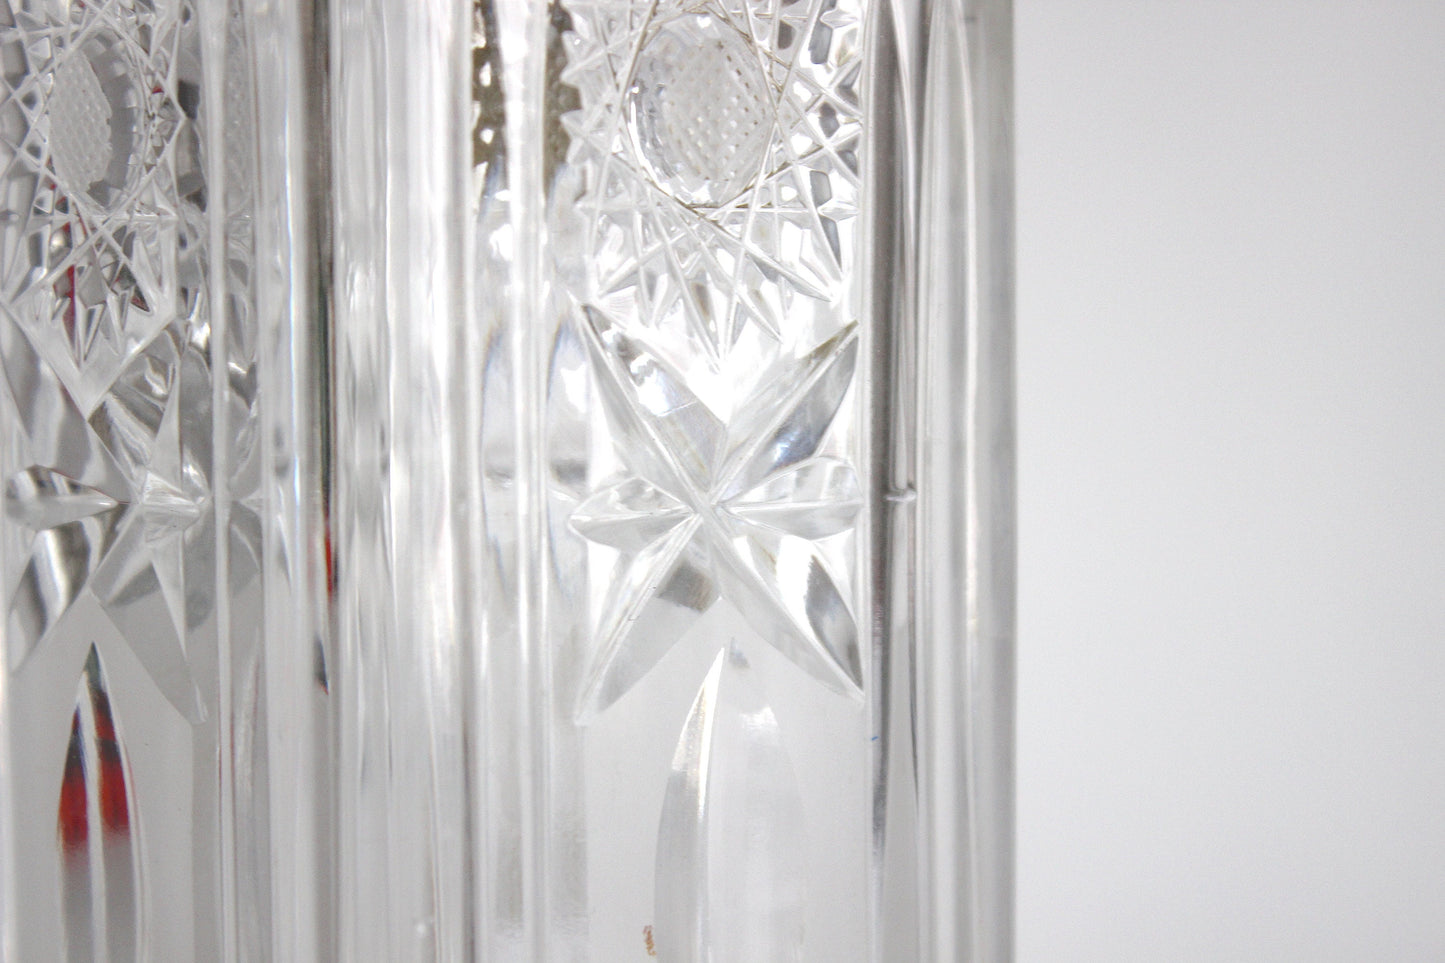 Vintage 1970s H.G. Echt Bleikristall Lead Crystal Vase from Austria, Sunflower Motif, 21cm Hand-Cut Square Design, Collectible Glass